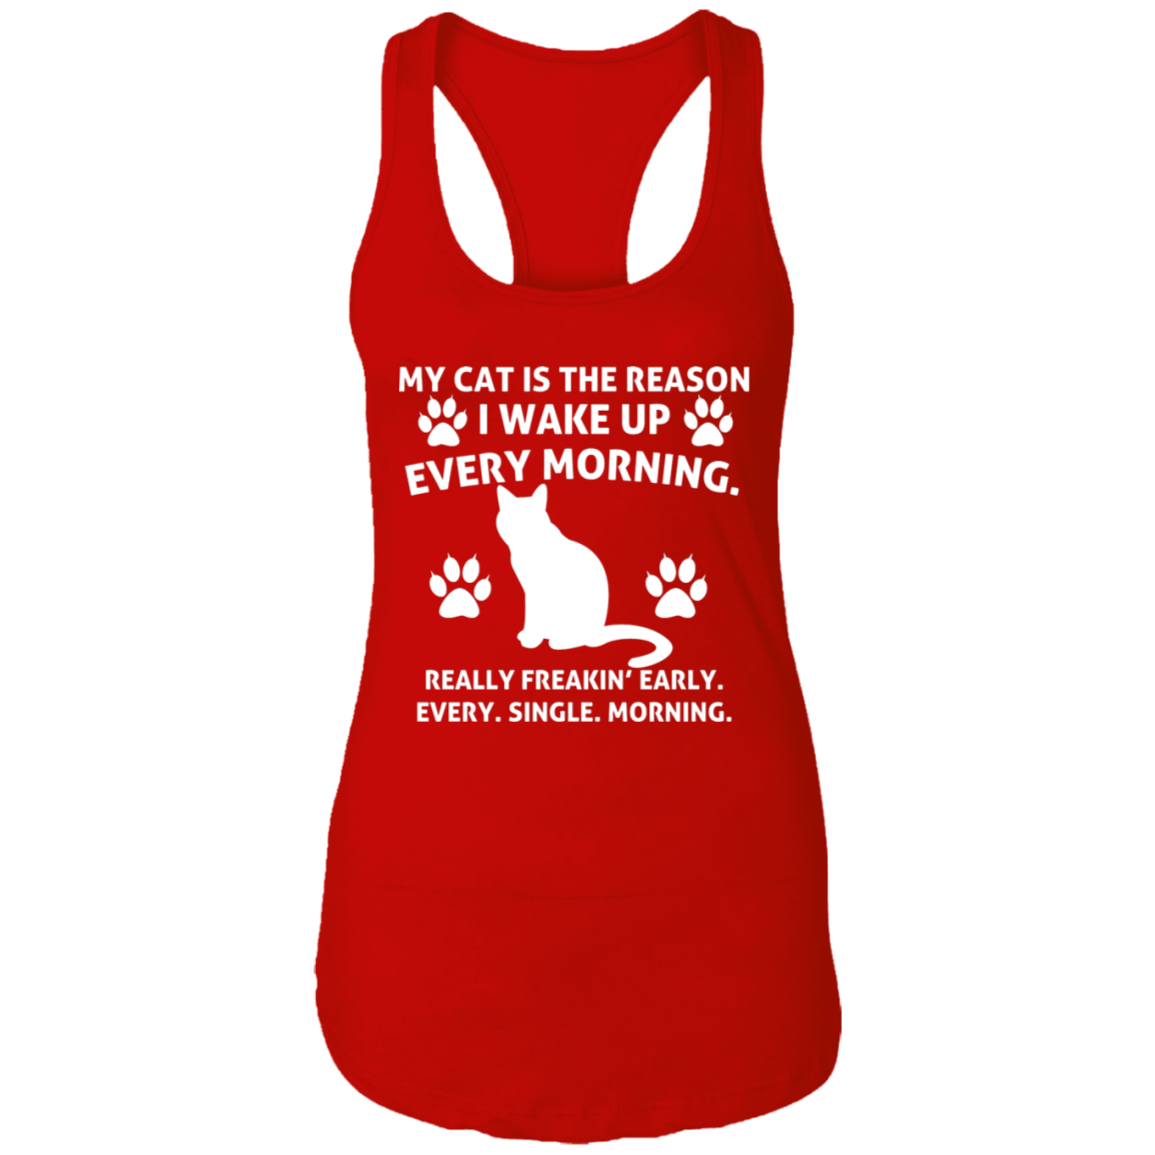 My Cat Is The Reason - Ladies Racer Back Tank.